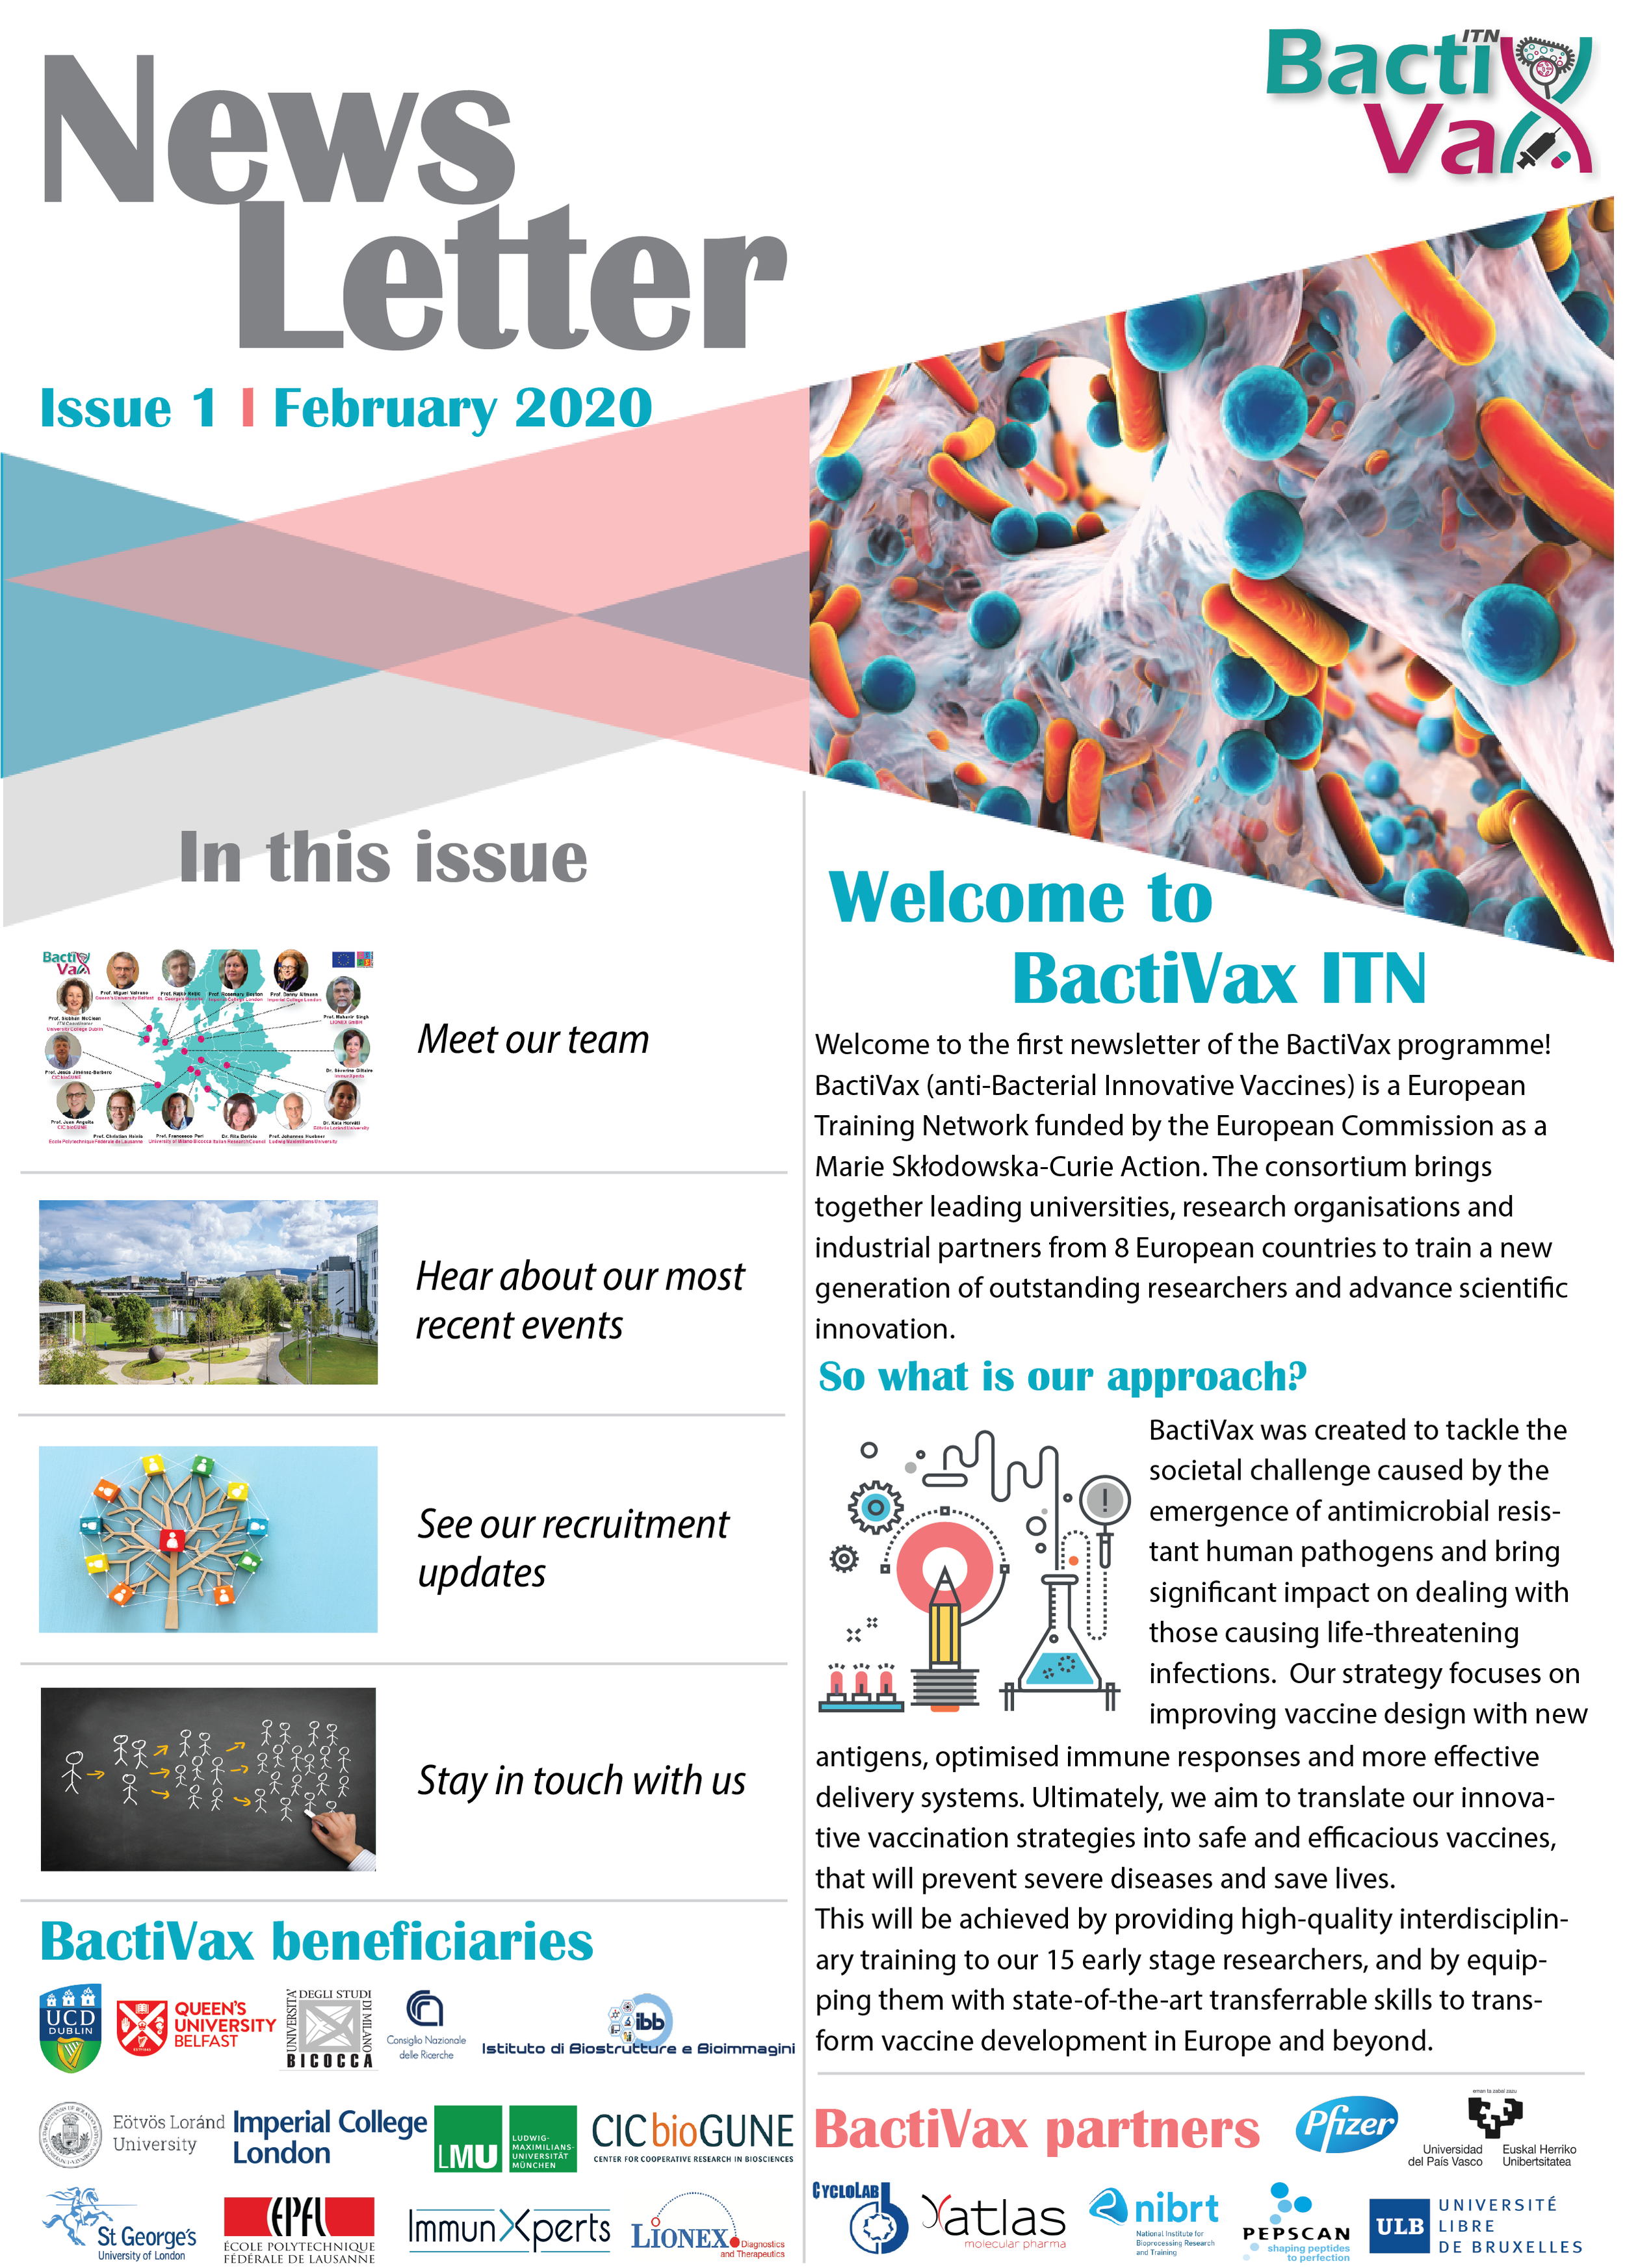 BactiVax Newsletter Issue 1 February 2020 full res - Copy.png